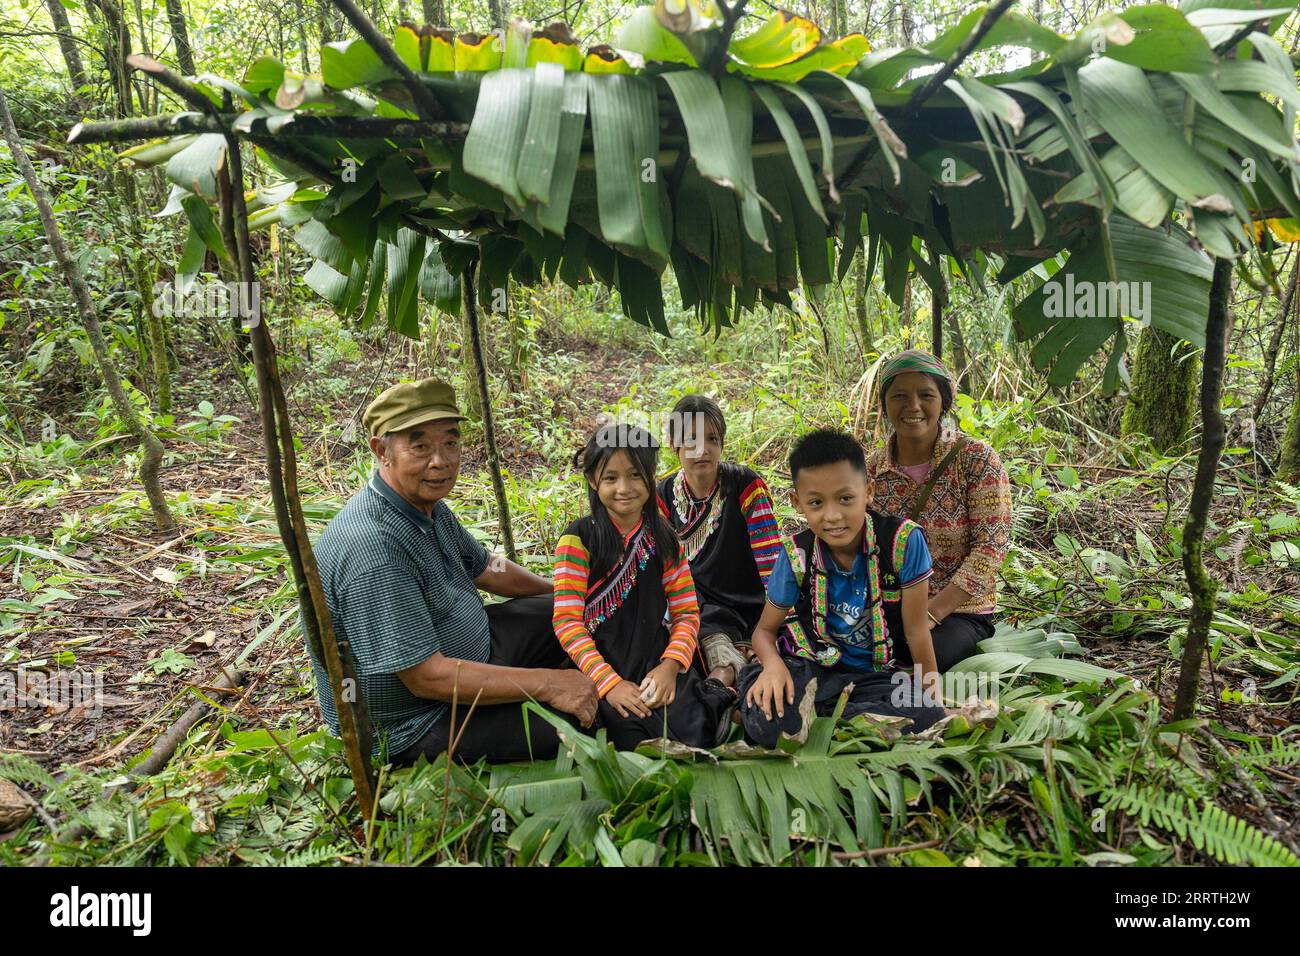 230726 -- JINPING, July 26, 2023 -- Zhang Puzhong 1st L, his wife Wang Suying 1st R and their grandchildren pose for a photo under a banana leaf shed in the forest near Xiaxinzhai Village, Zhemi Township, Jinping County, Honghe Hani and Yi Autonomous Prefecture, southwest China s Yunnan Province, July 23, 2023. After days of thinking, Zhang Puzhong decided to do something instructive to his grandchildren: bring them back to the forest he used to live as a child more than 60 years ago. This is very important. I know how happy I am today because I never forget how bitter my life was in the past, Stock Photo